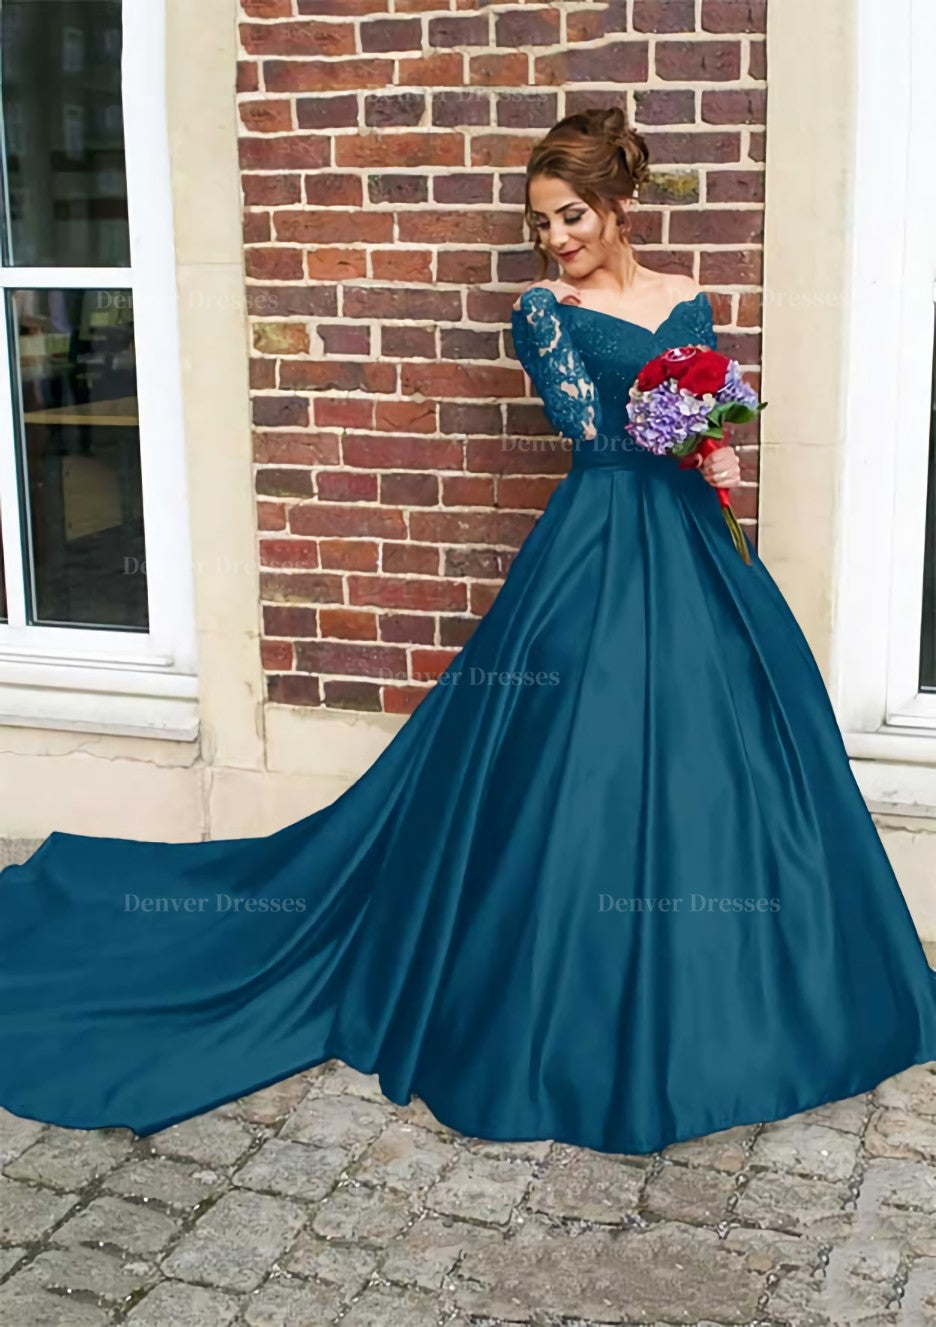 Bridesmaid Dresses Design, Satin Prom Dress Ball Gown V-Neck Cathedral Train With Lace